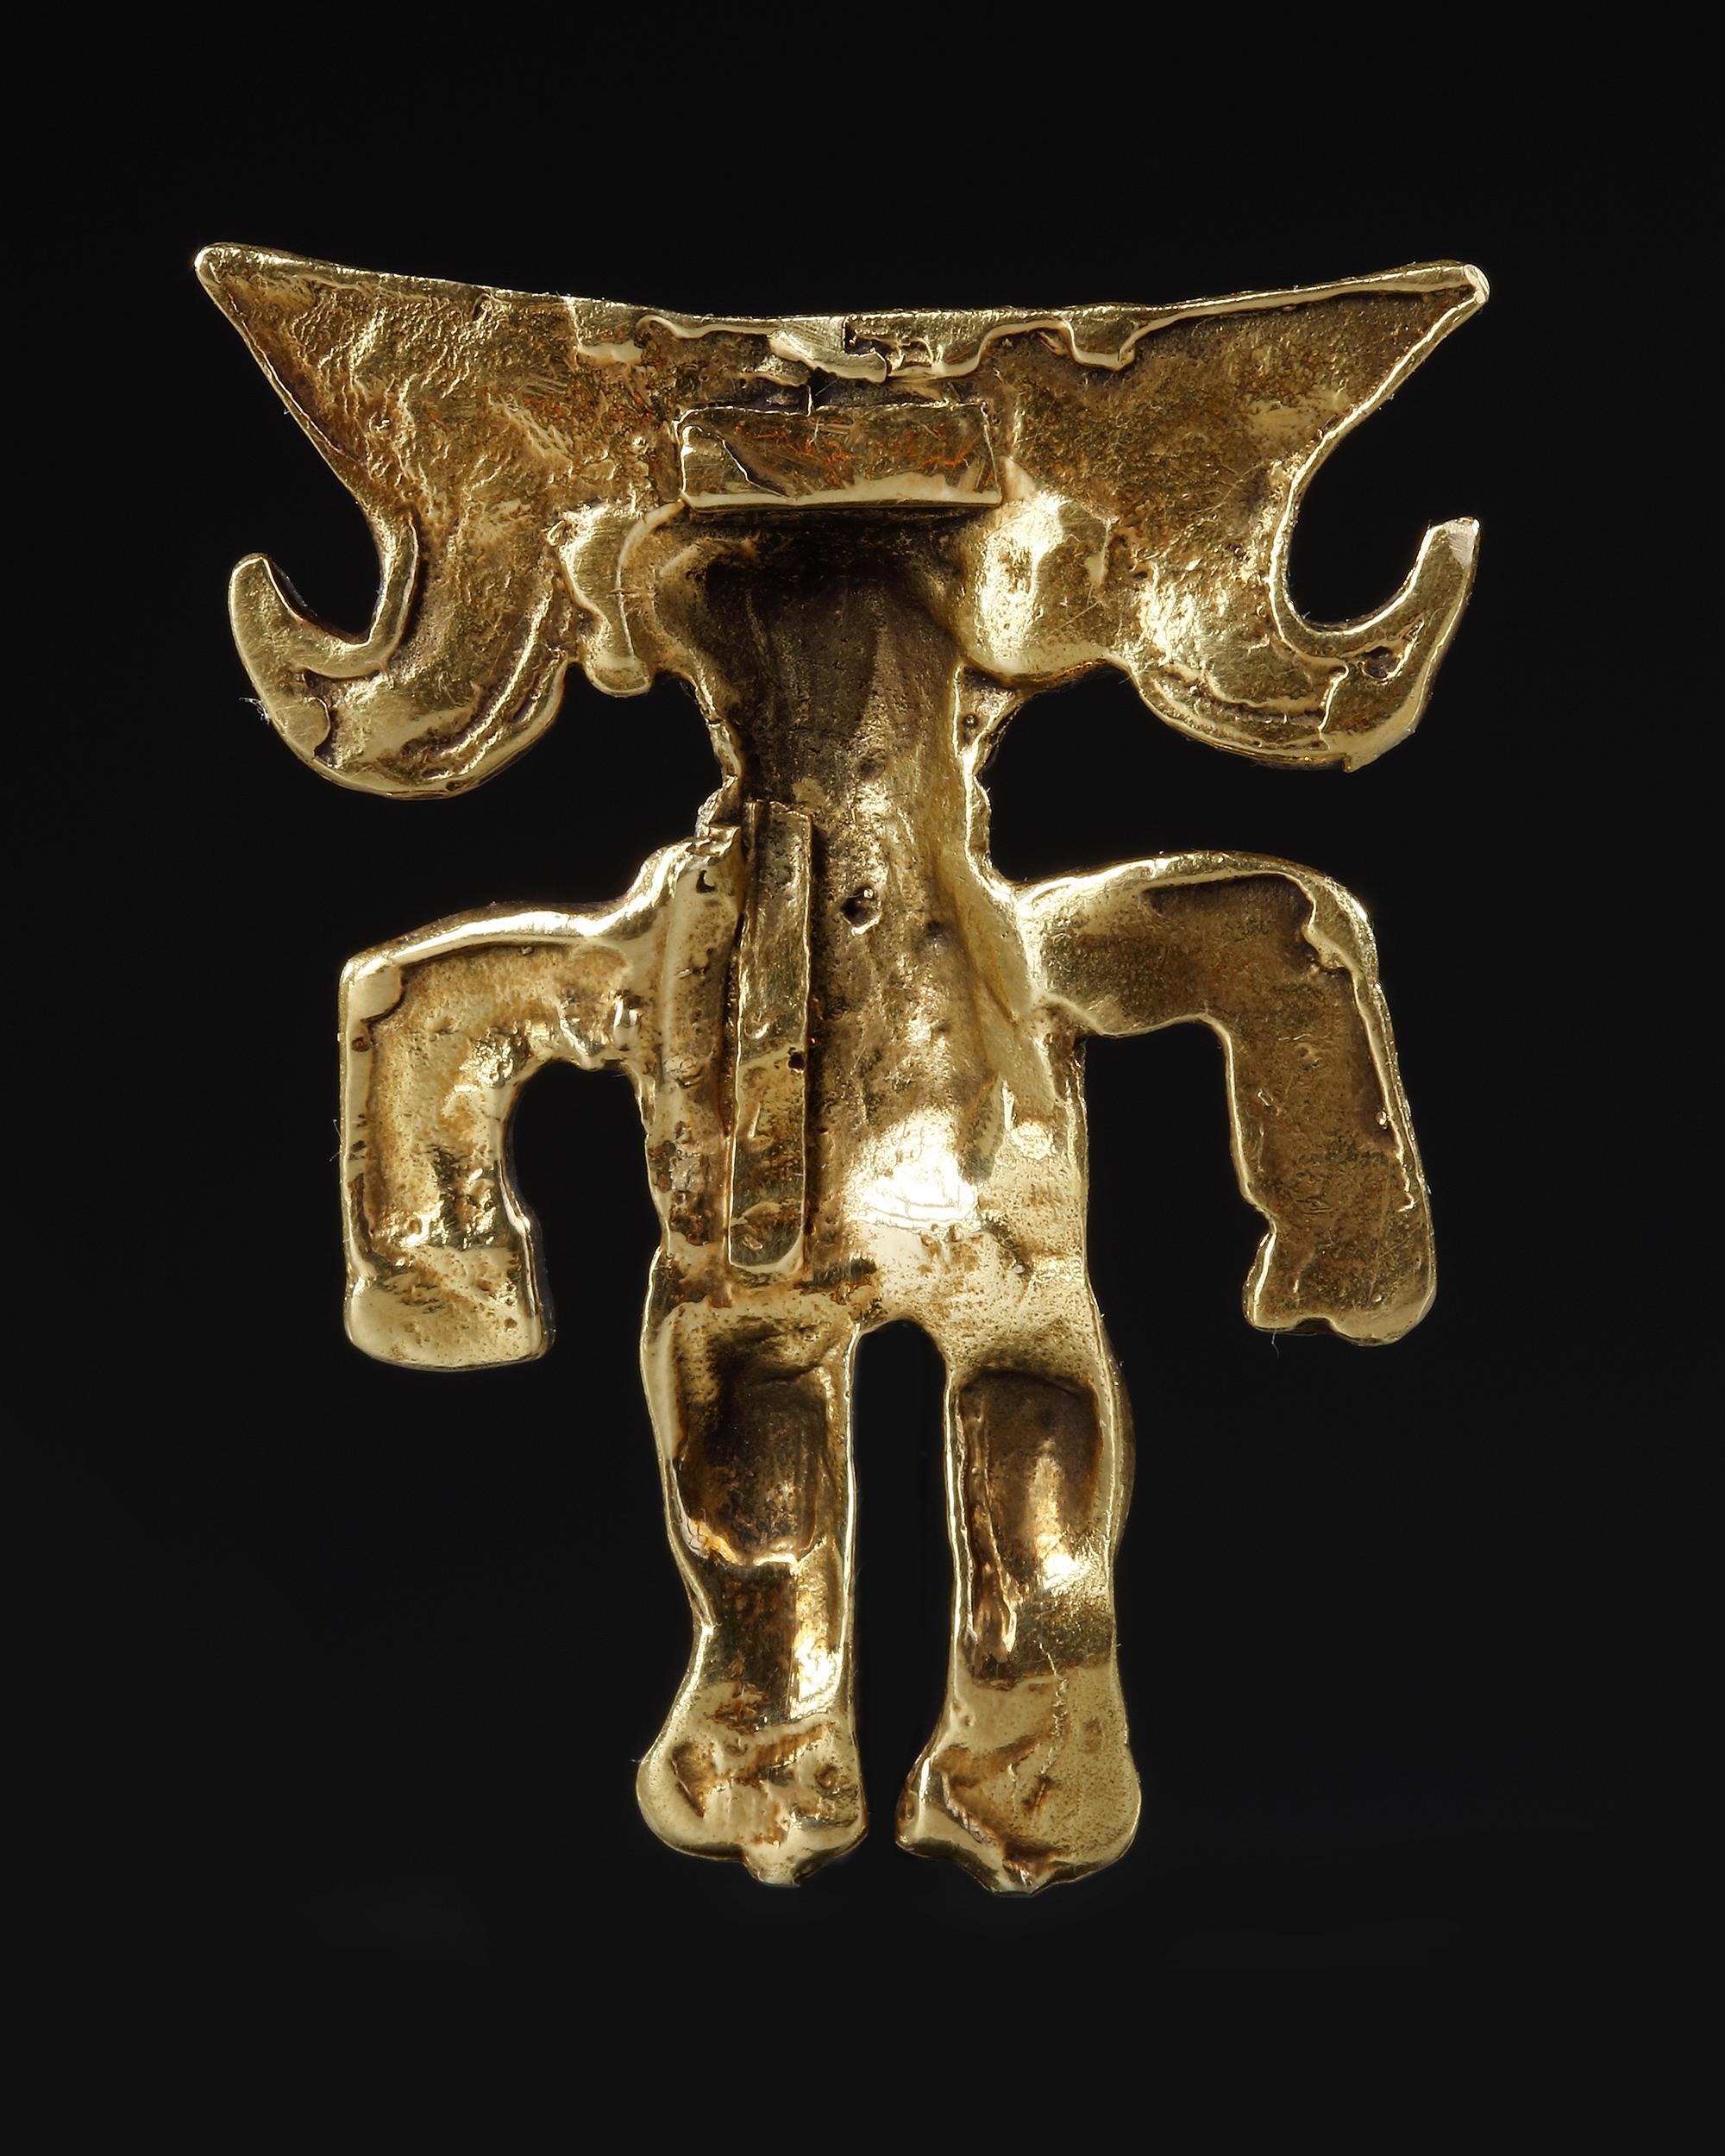 A PRE COLOMBIAN GOLD FIGURE, CIRCA 800-1200 A.D - Image 4 of 4